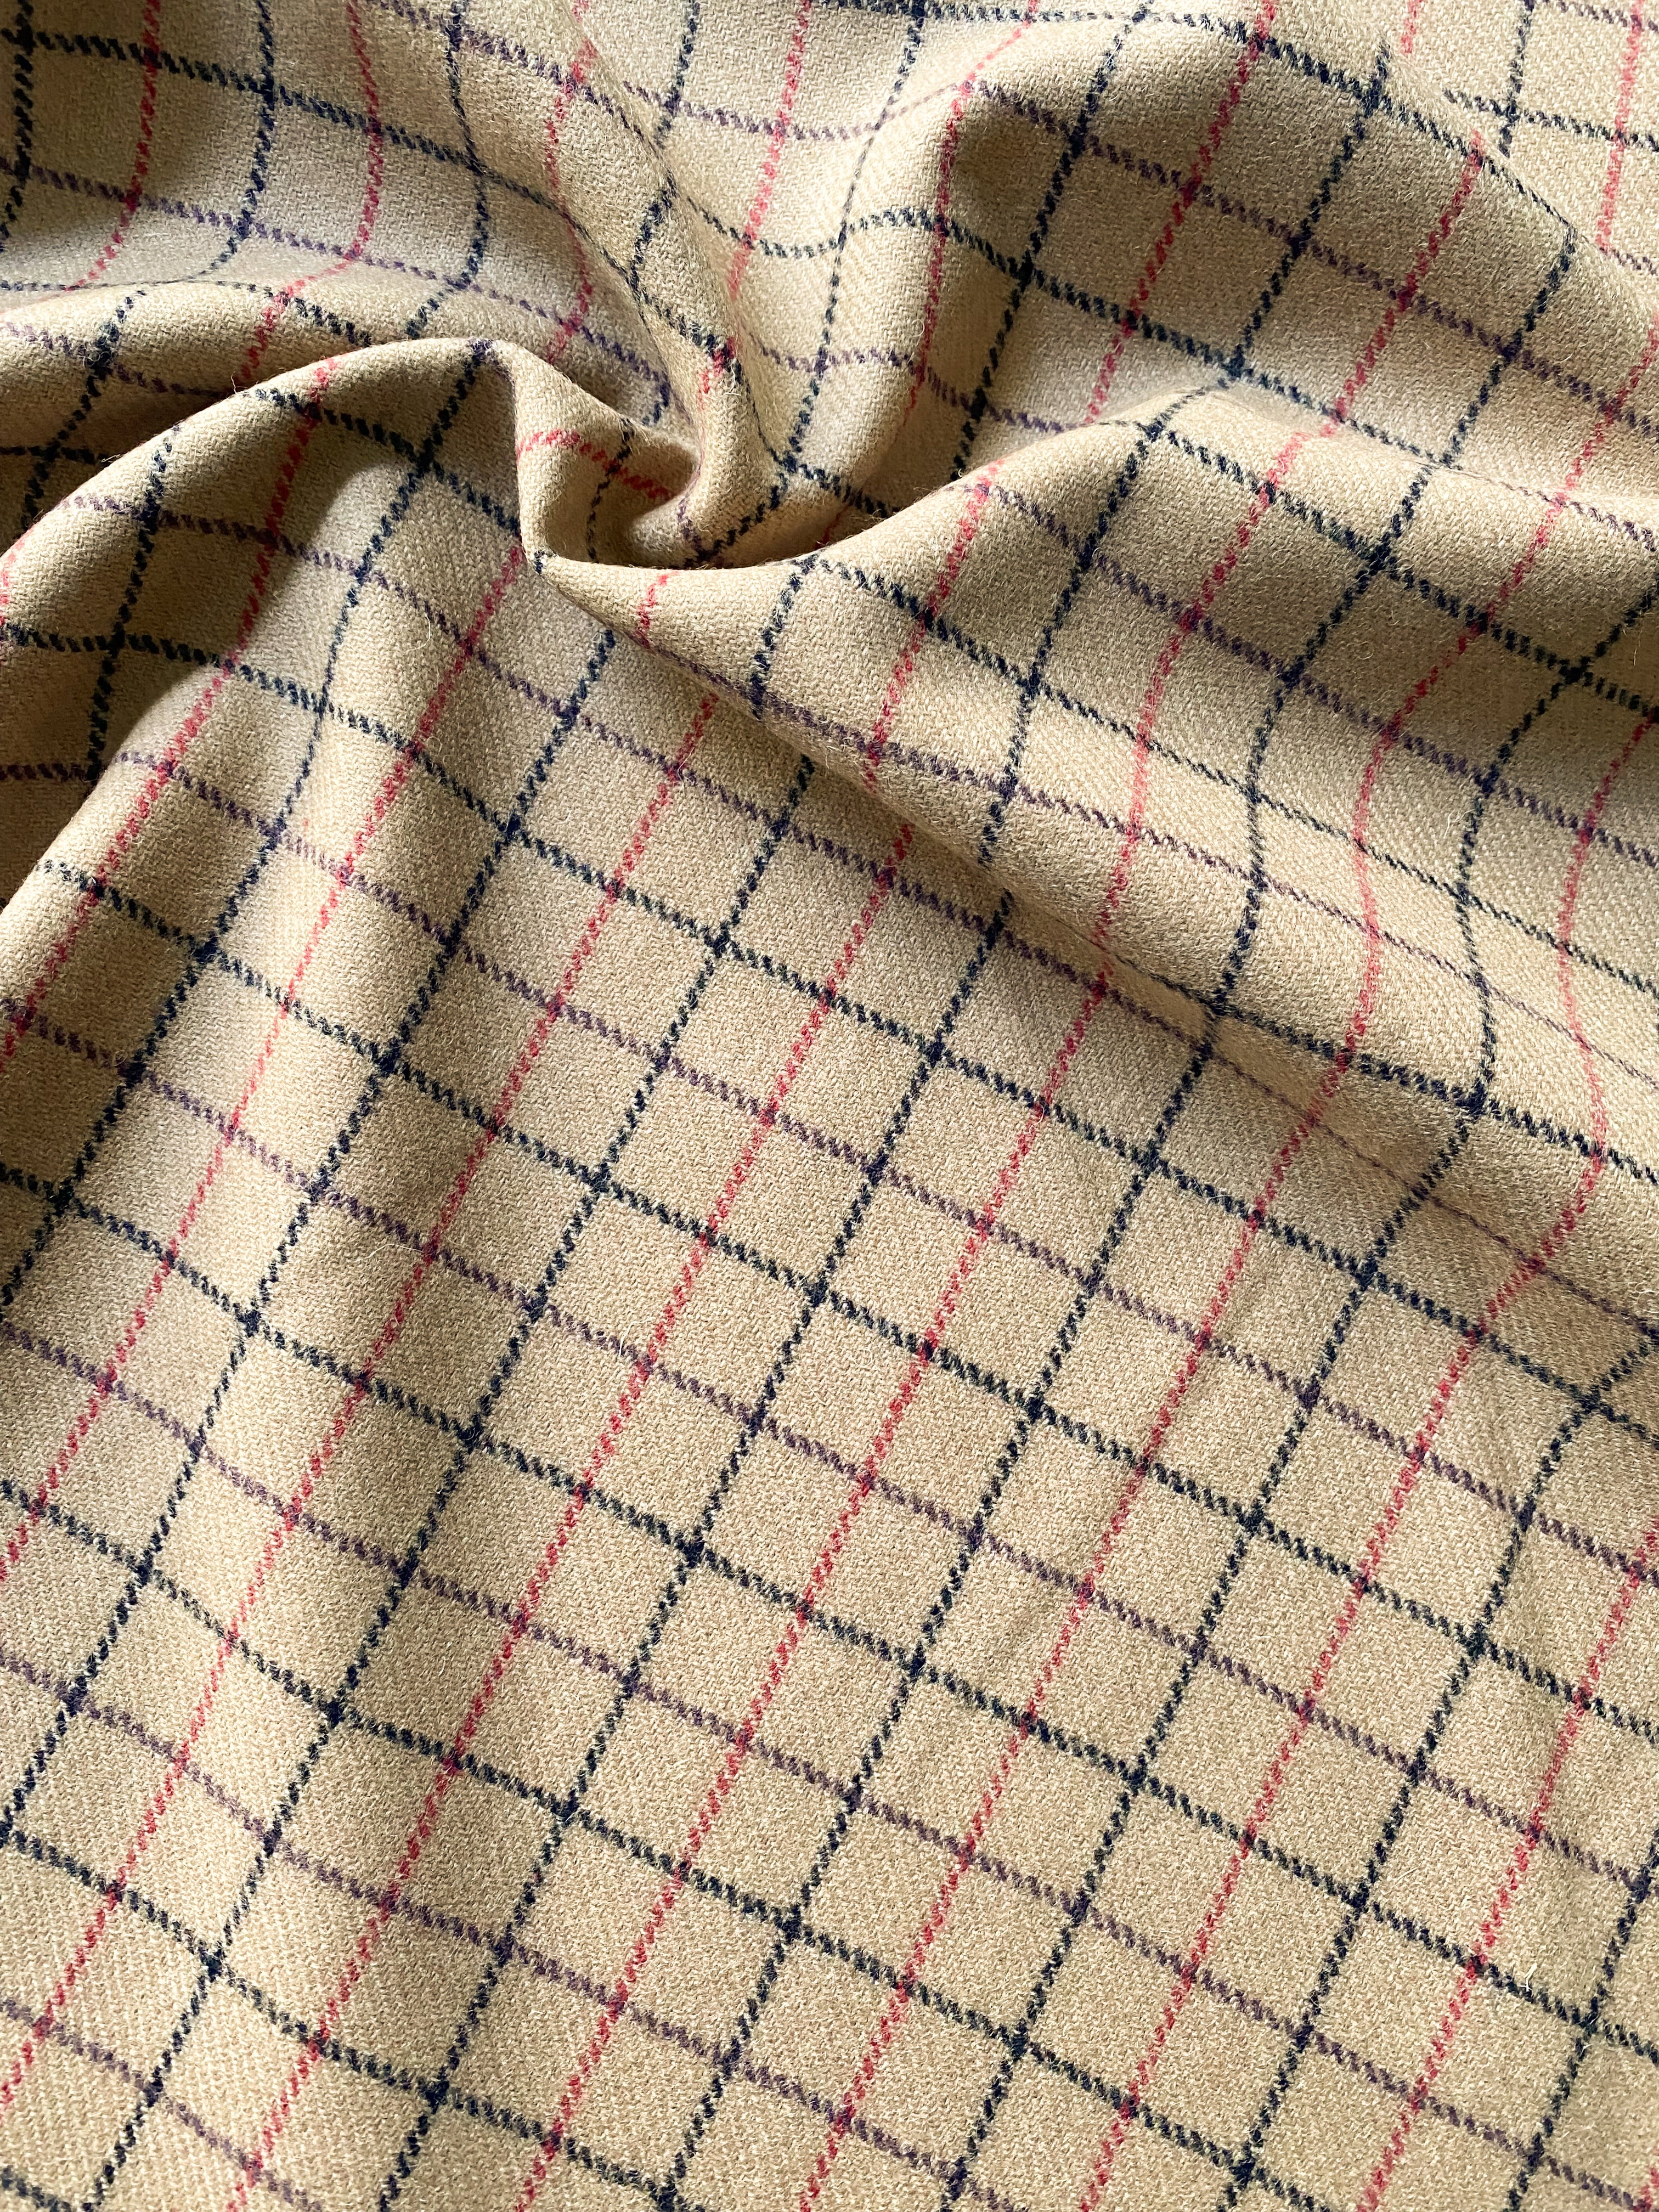 No. 1032 Wool fabric with a checked pattern